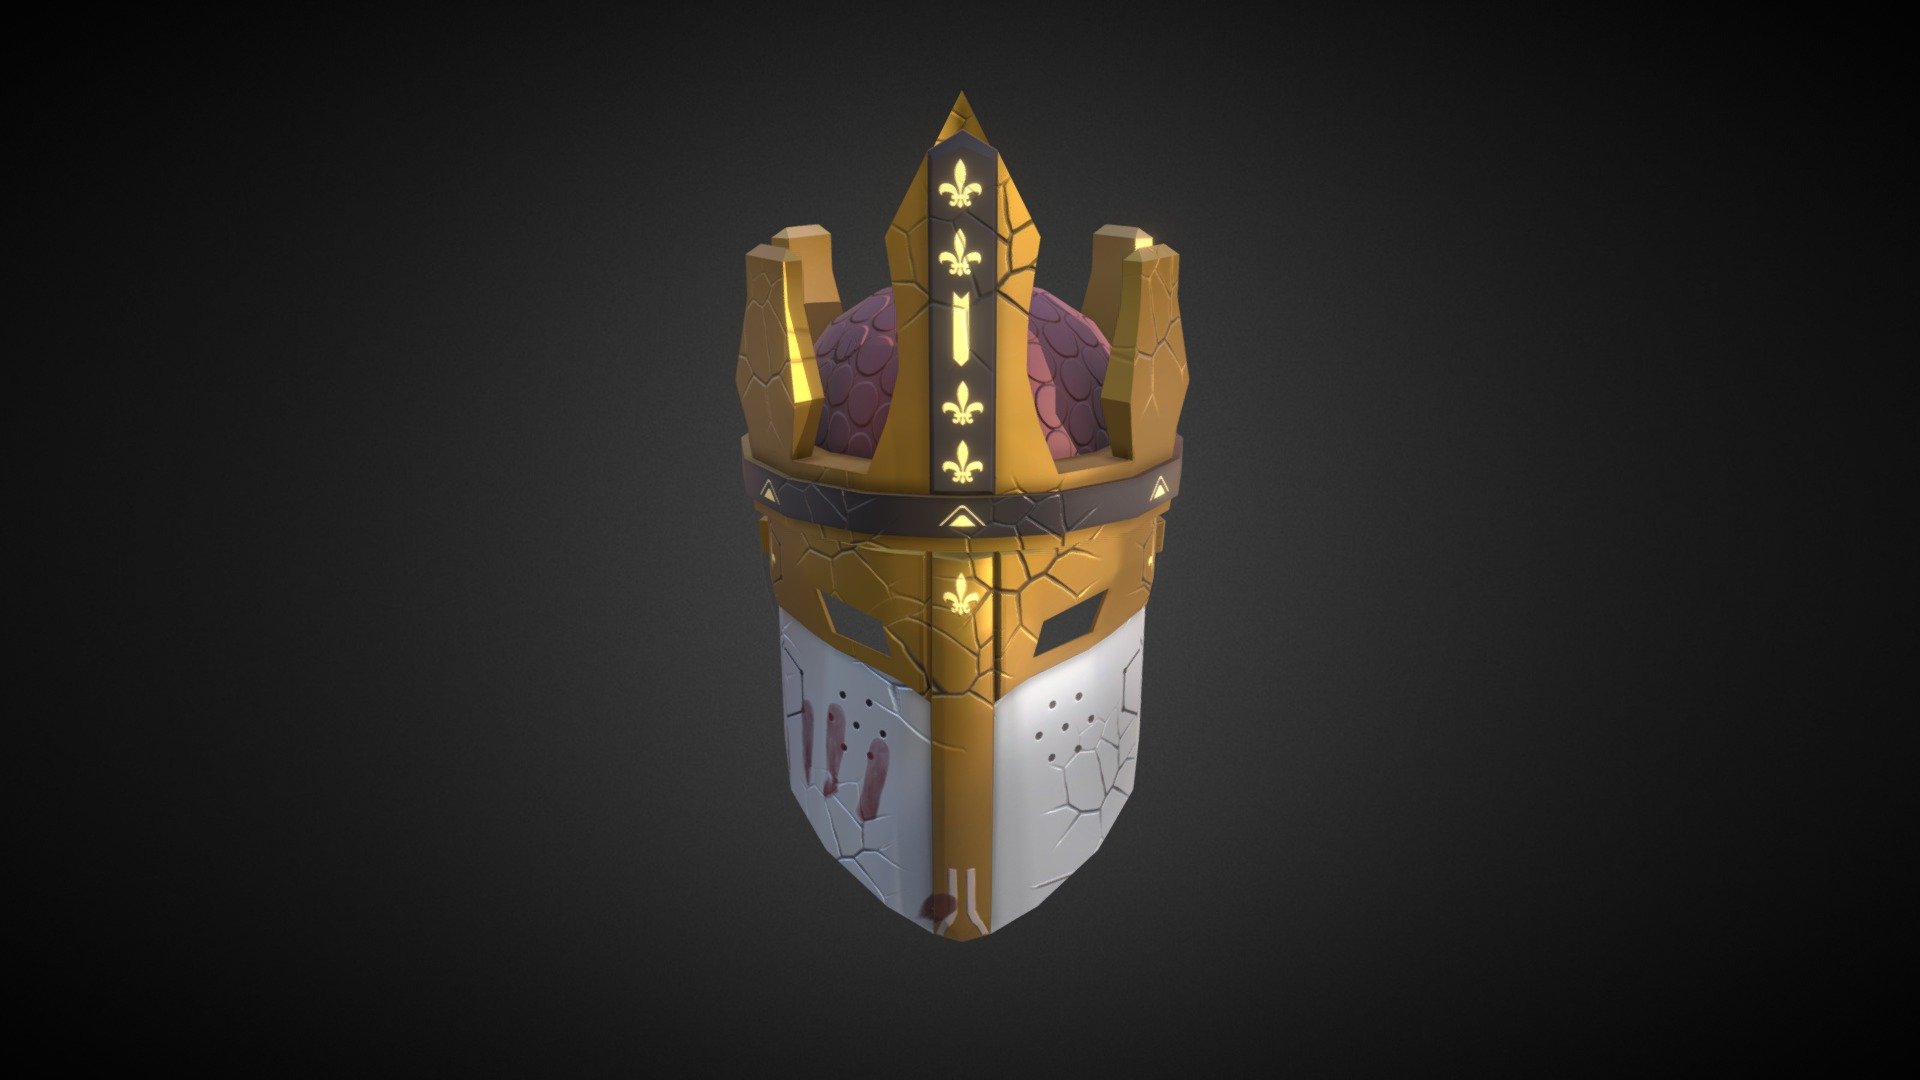 Alright this is Day 5! I tried different things (sword, spear, throne) but ultimately I chose to do a damaged  crown/helmet 3d model